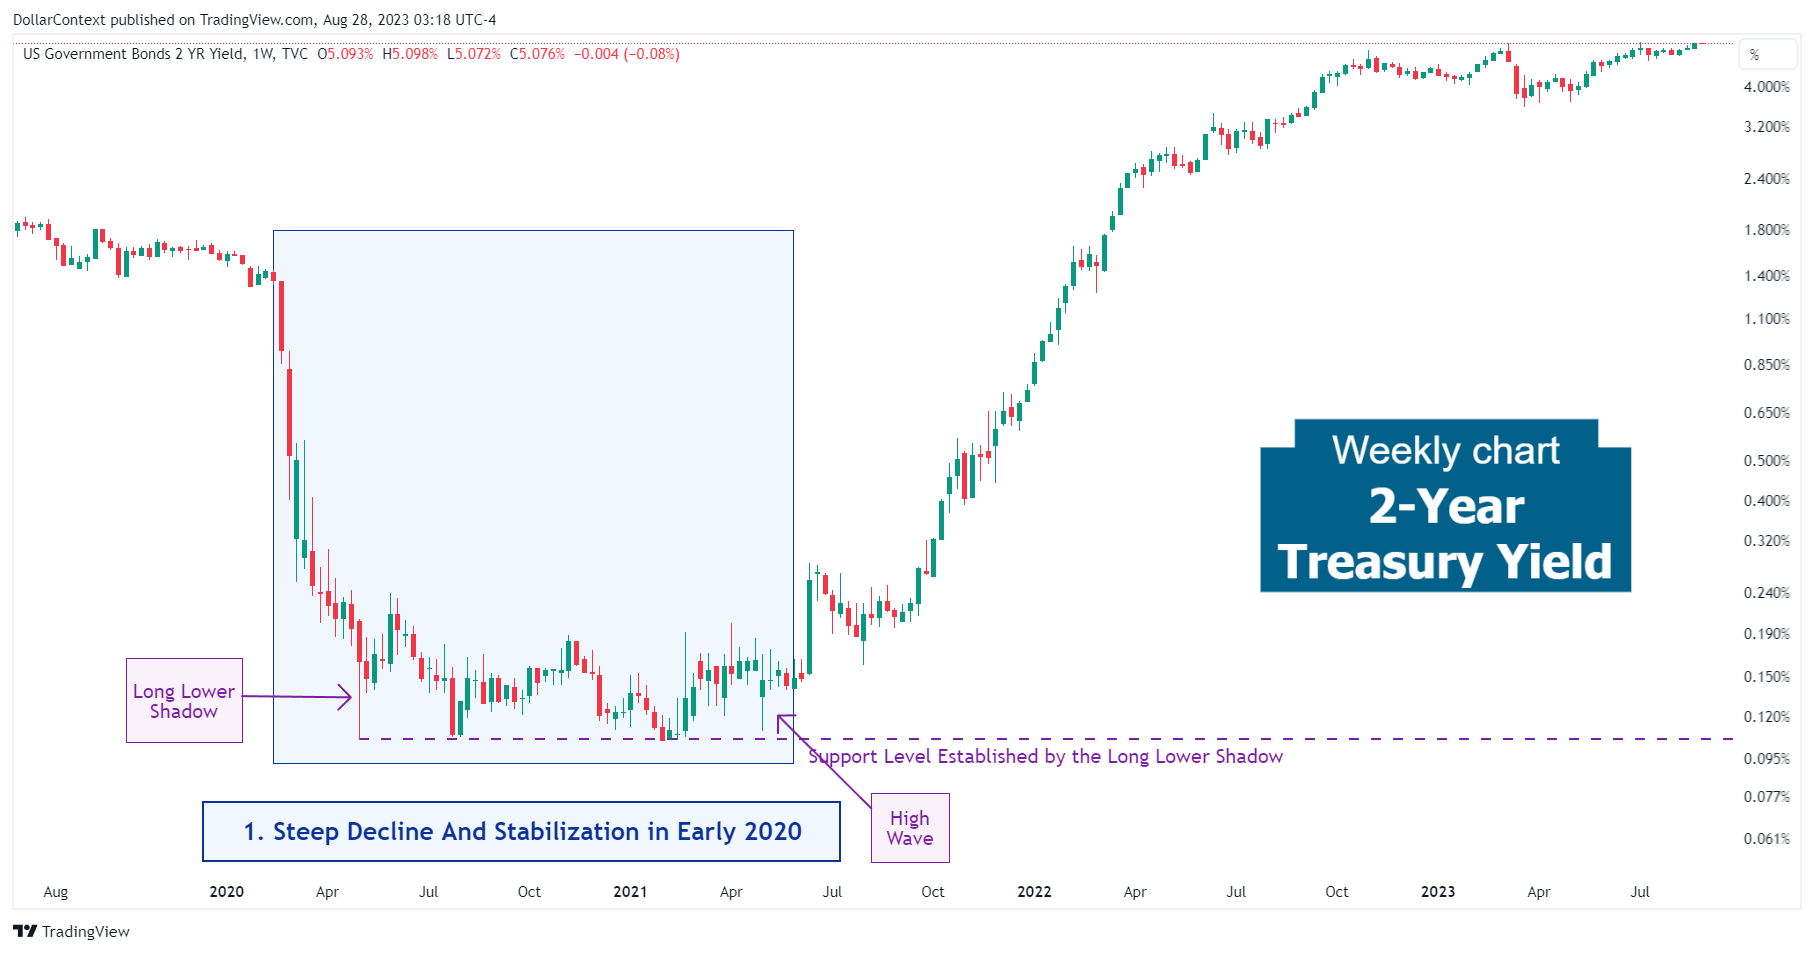 2-Year Treasury Yield: The Steep Decline Followed by Stabilization in Early 2020 (Weekly Chart)